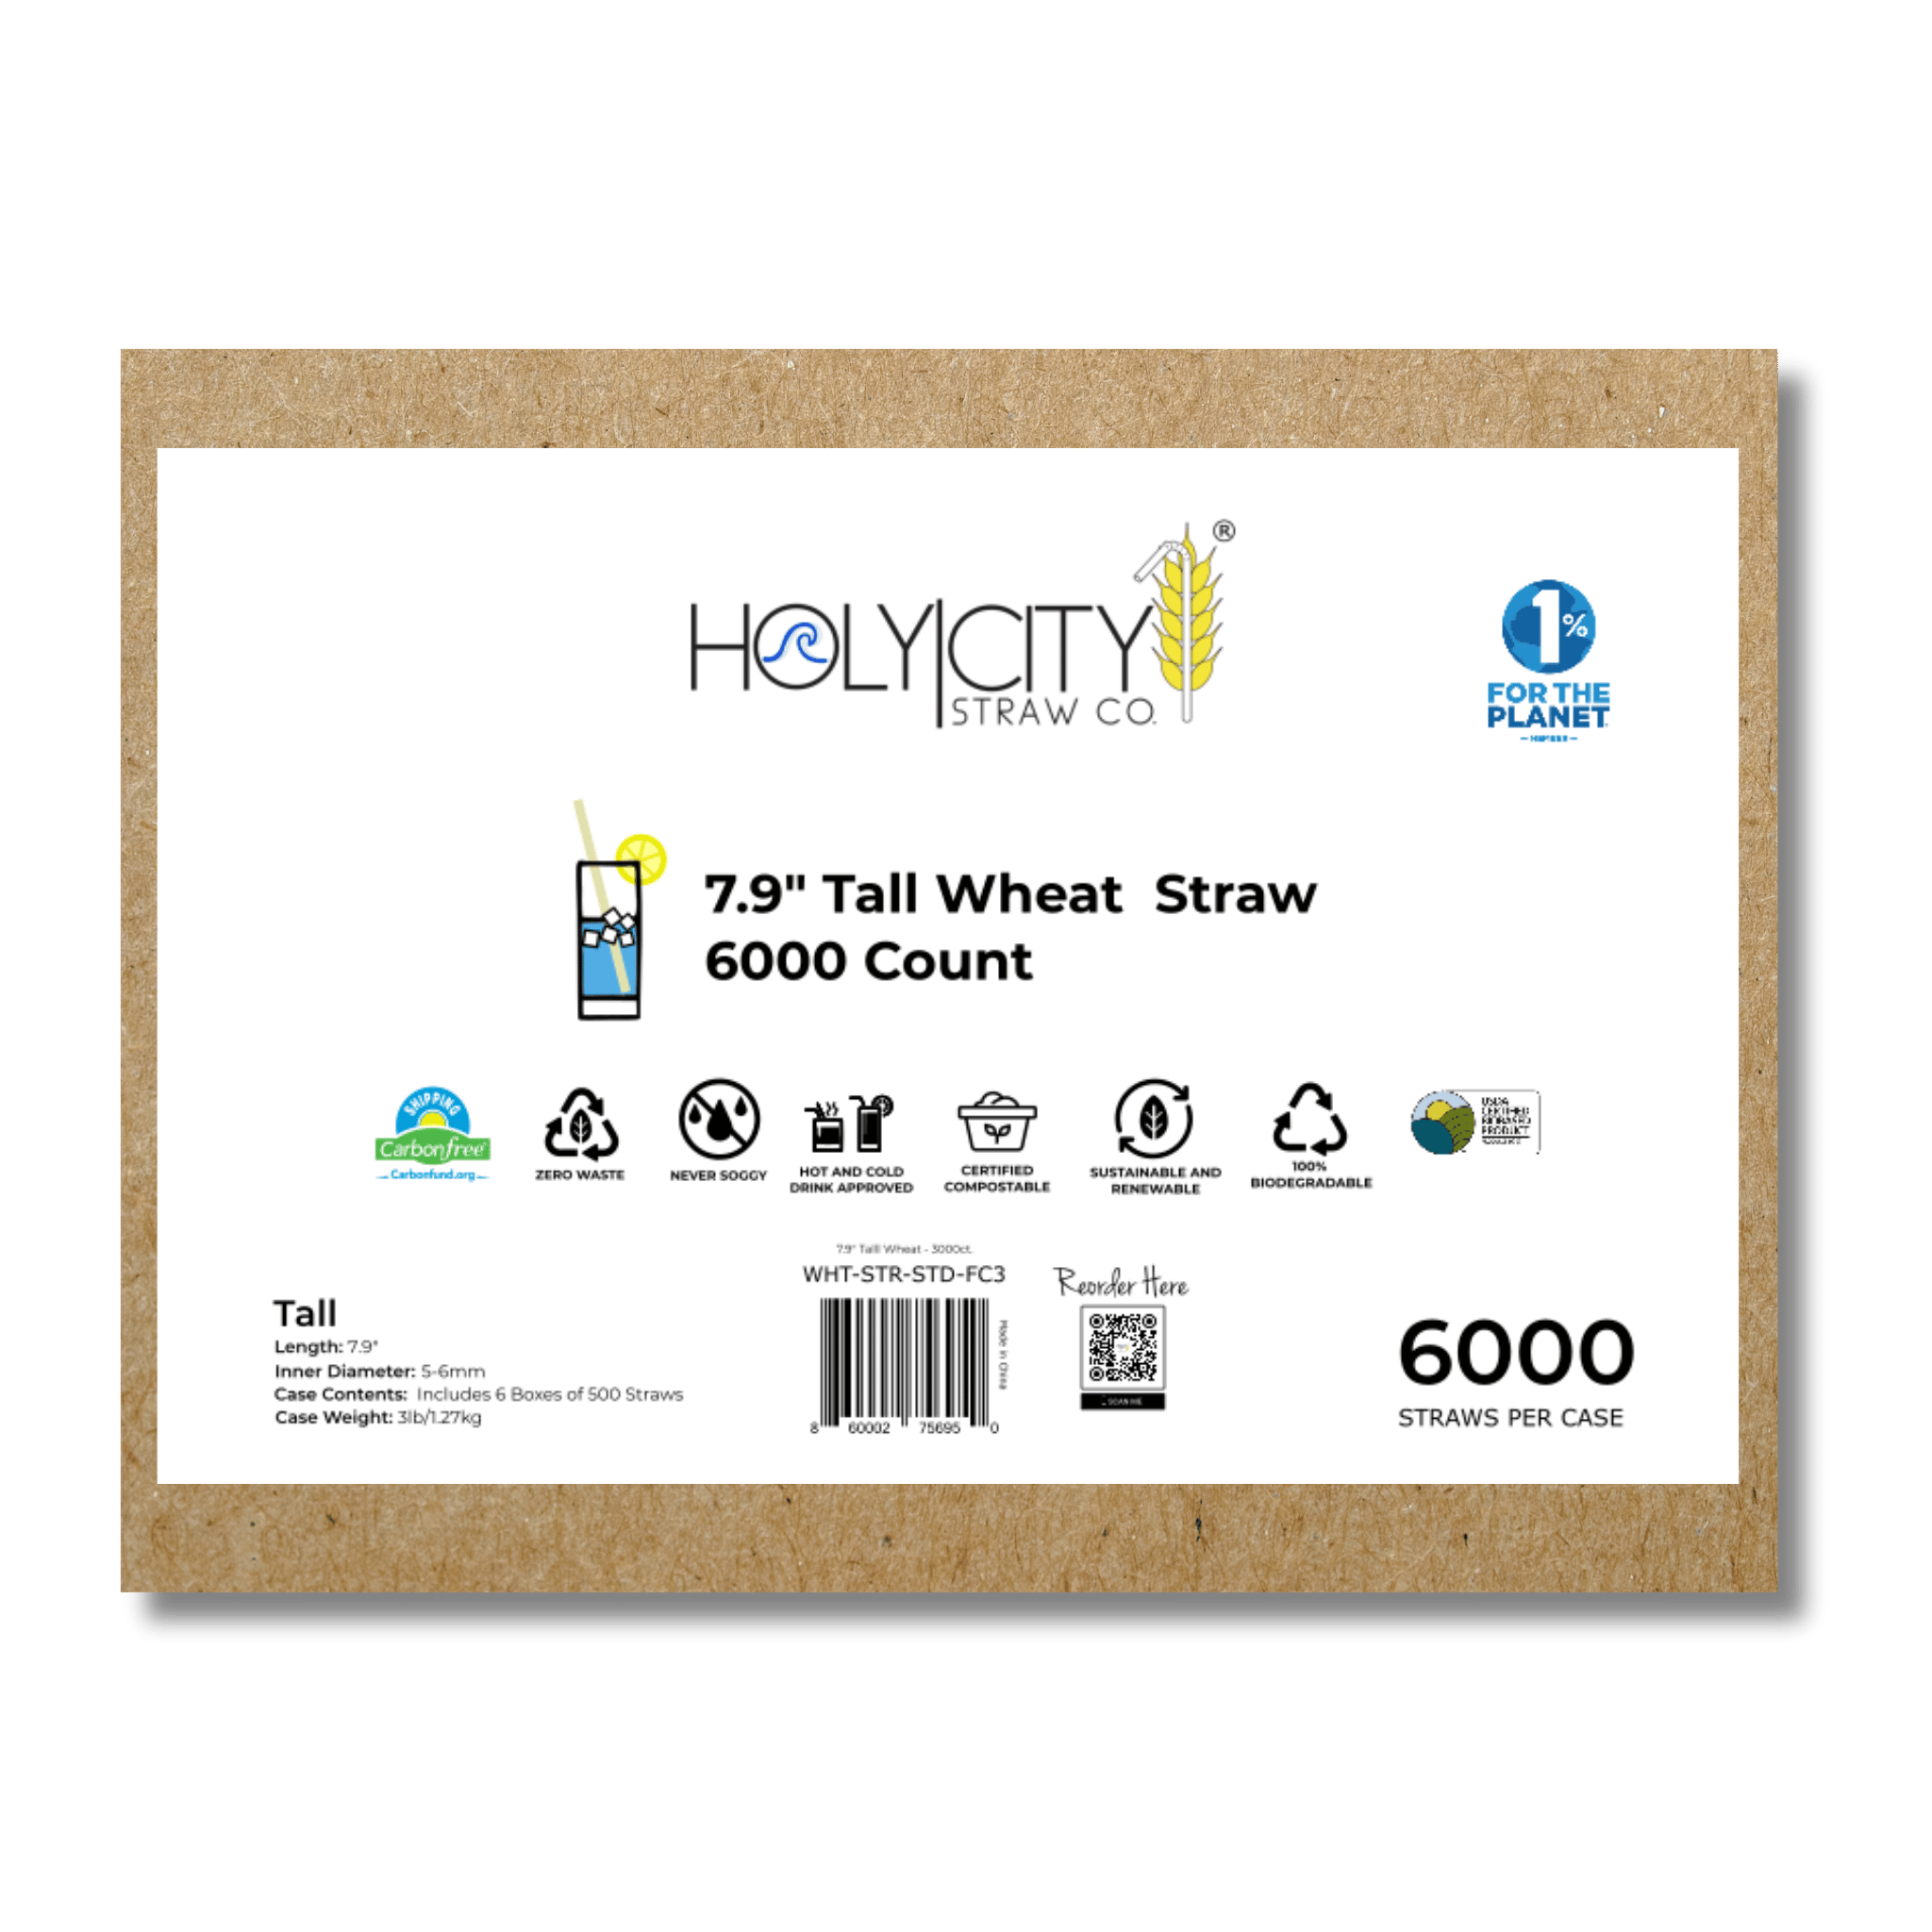 HolyCityStrawCompany 7.9-inch Wheat Tall Straws box of 6000 straws showing eco-friendly certifications and product details.